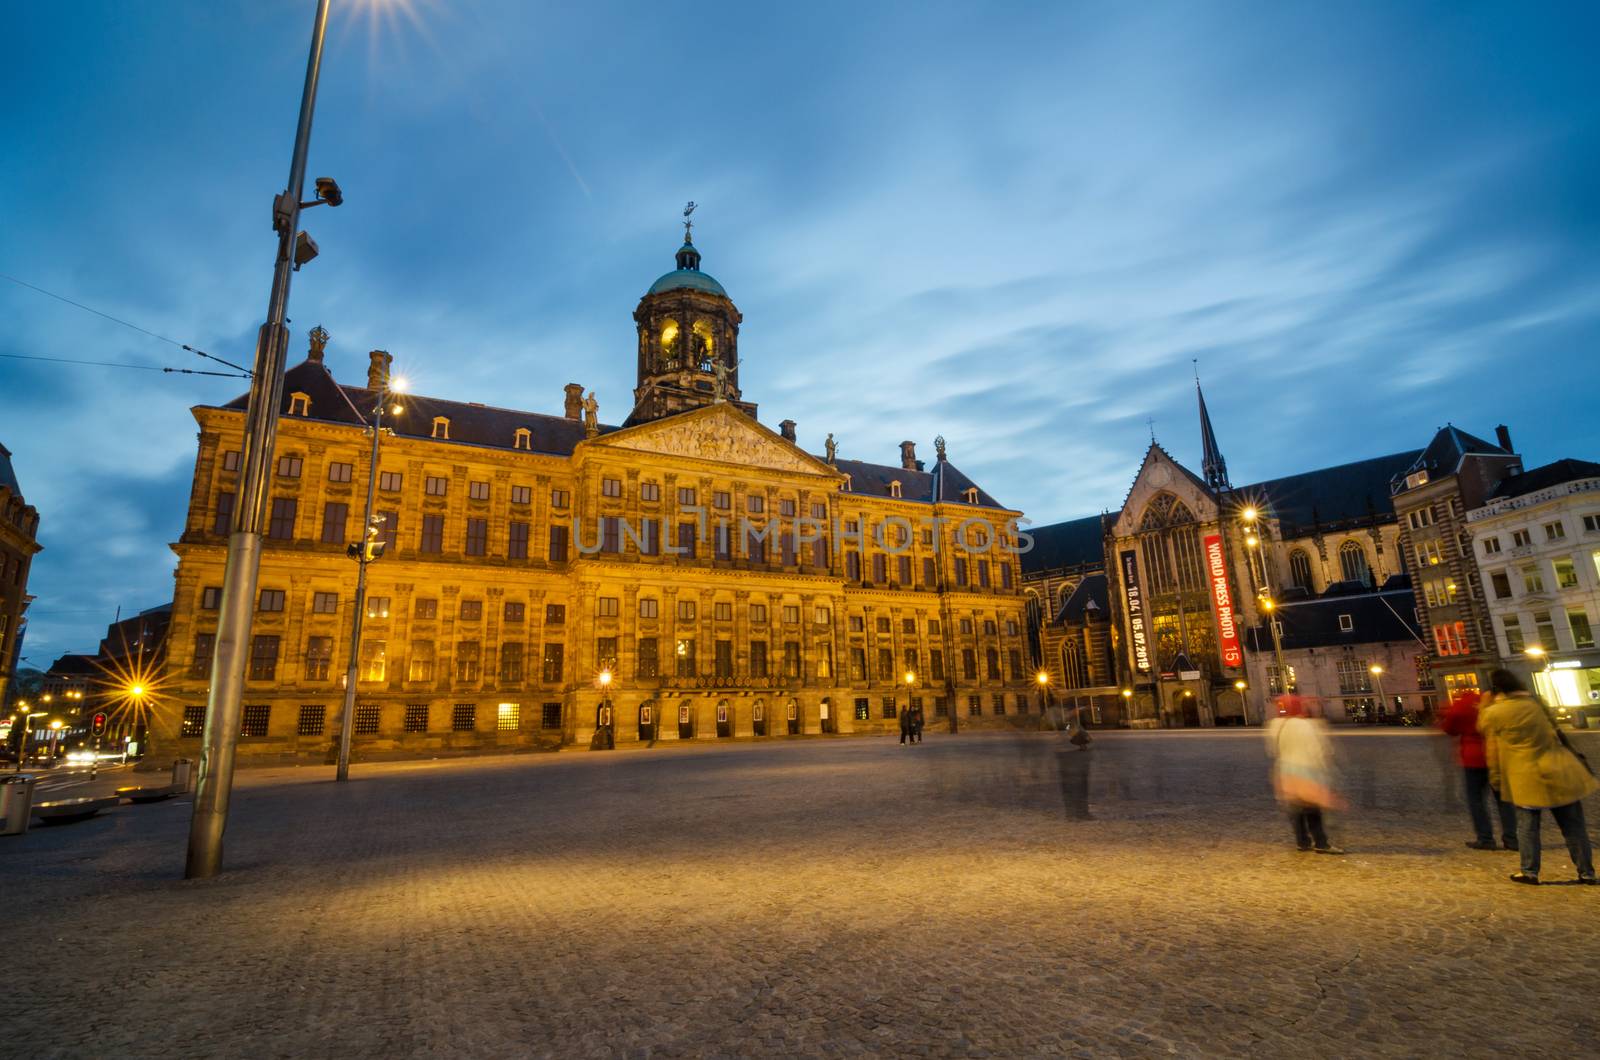 Amsterdam, Netherlands - May 7, 2015: Tourist visit Dam Square with a view of the Royal Palace and the Nieuwe Kerk in Amsterdam, Netherlands. Its notable buildings and frequent events make it one of the most well-known and important locations in the city and the country.